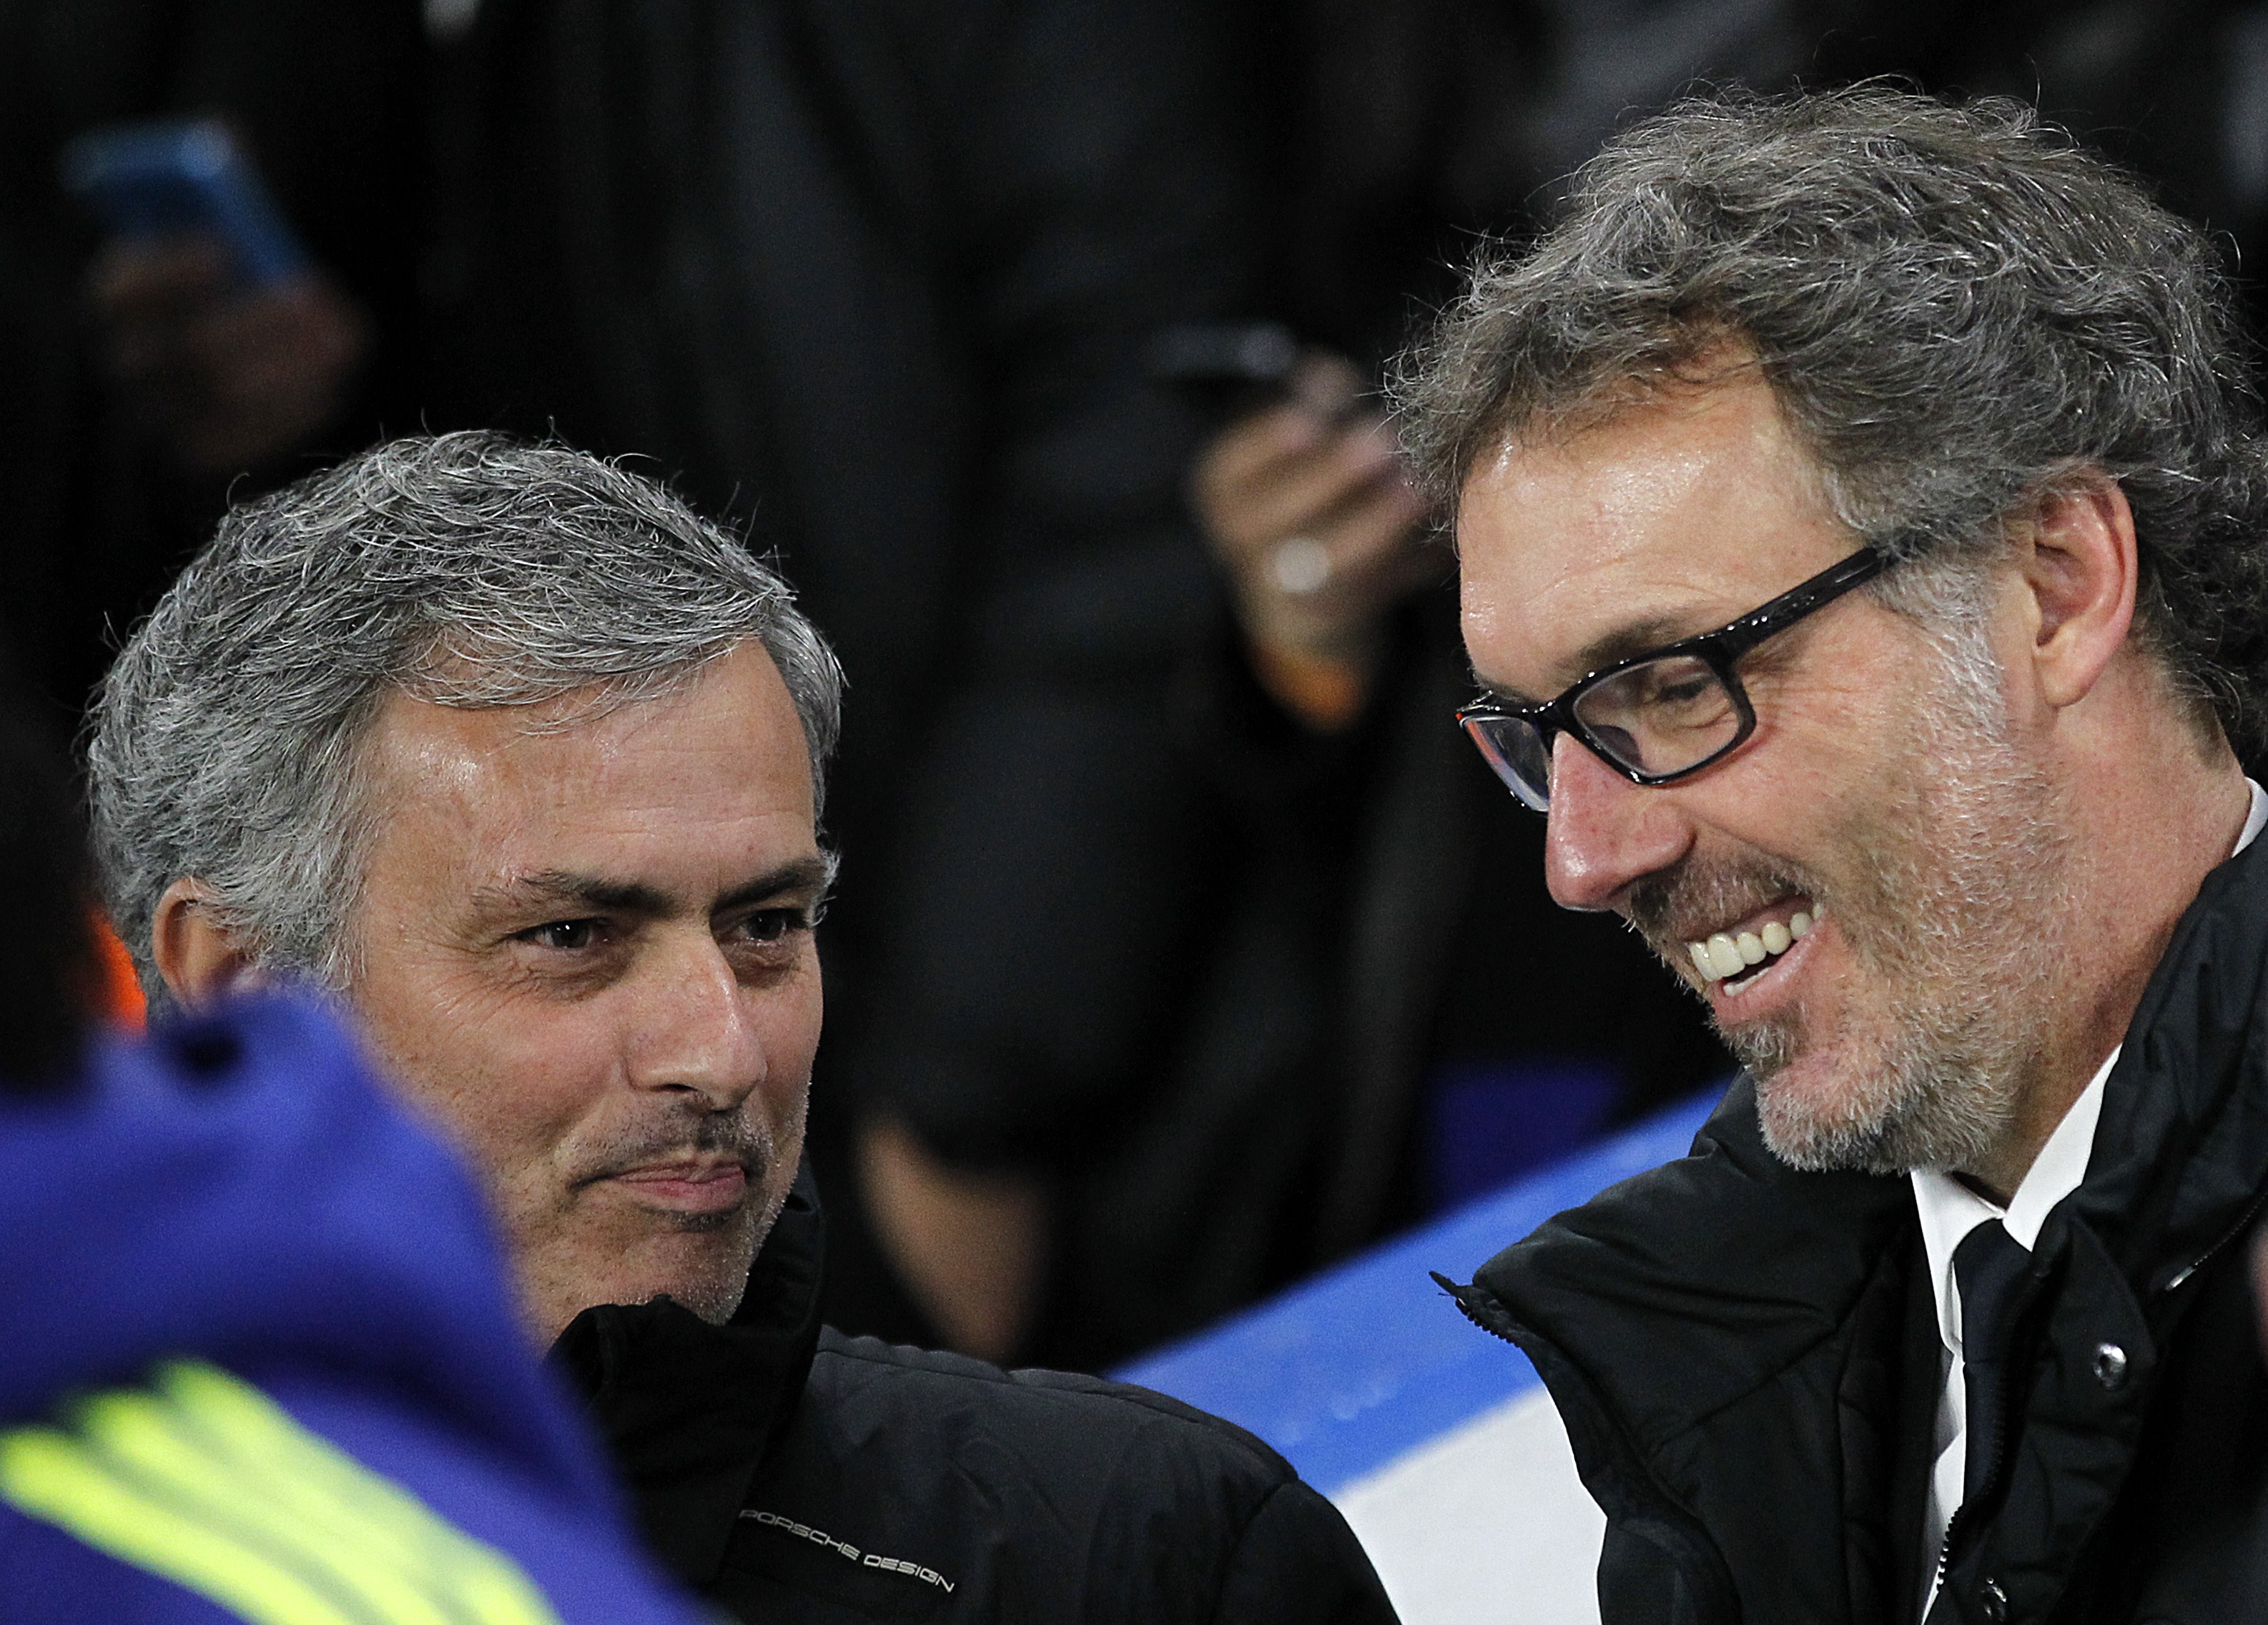 Paris Saint-Germain's French head coach Laurent Blanc (R) speaks with Chelsea's Portuguese manager Jose Mourinho before the start of the UEFA Champions League round of 16 second leg football match between Chelsea and Paris Saint-Germain at Stamford Bridge in London on March 11, 2015. AFP PHOTO / IAN KINGTON        (Photo credit should read IAN KINGTON/AFP/Getty Images)